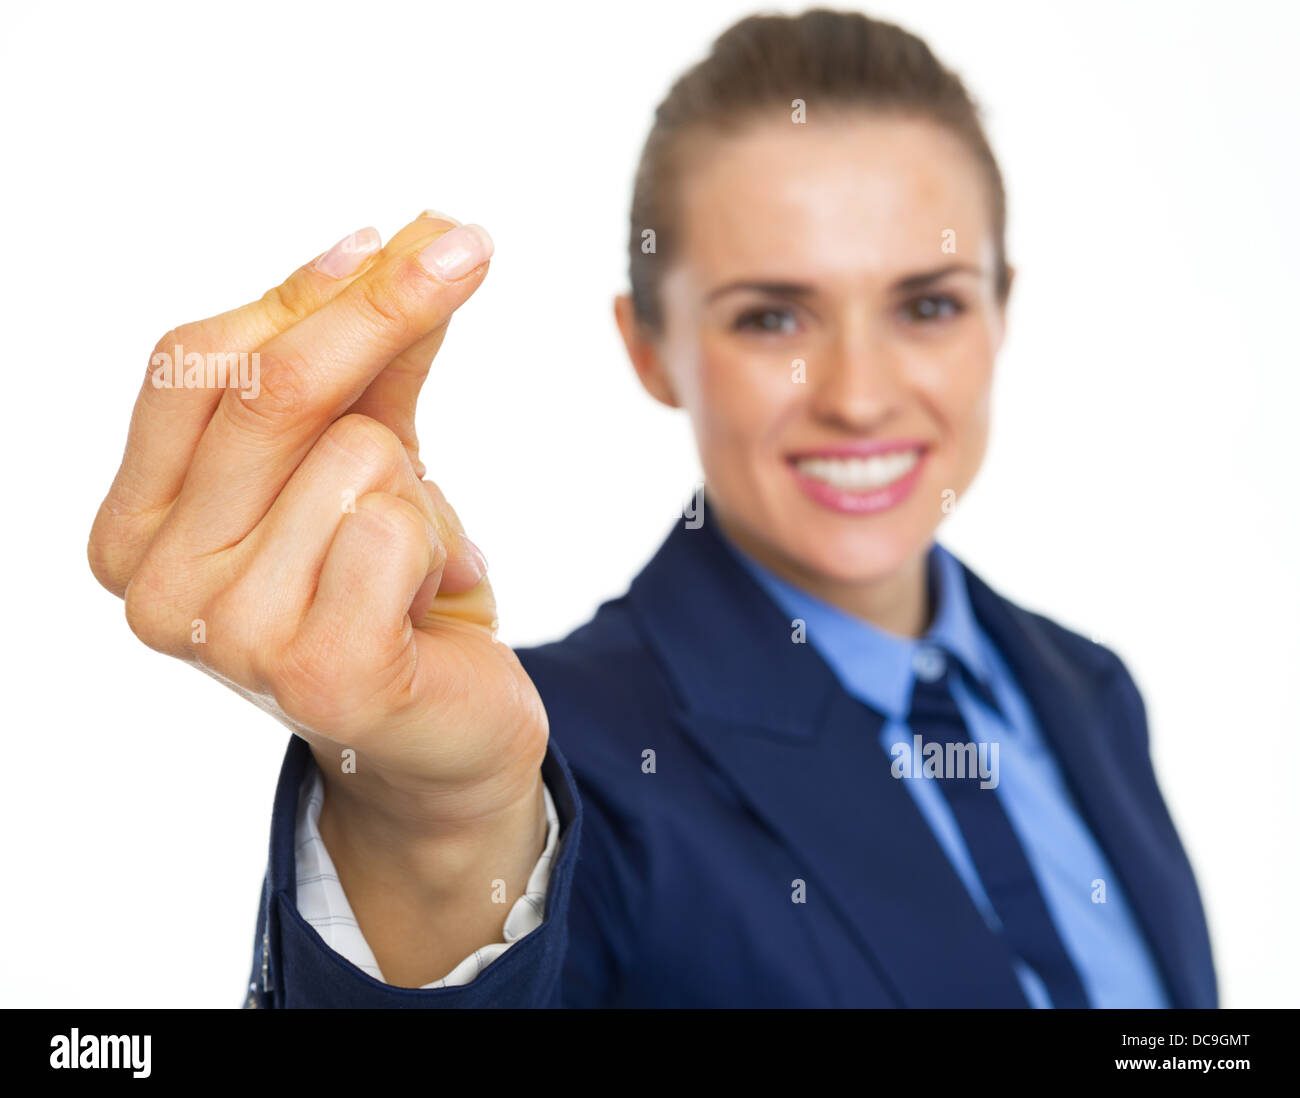 woman snapping fingers